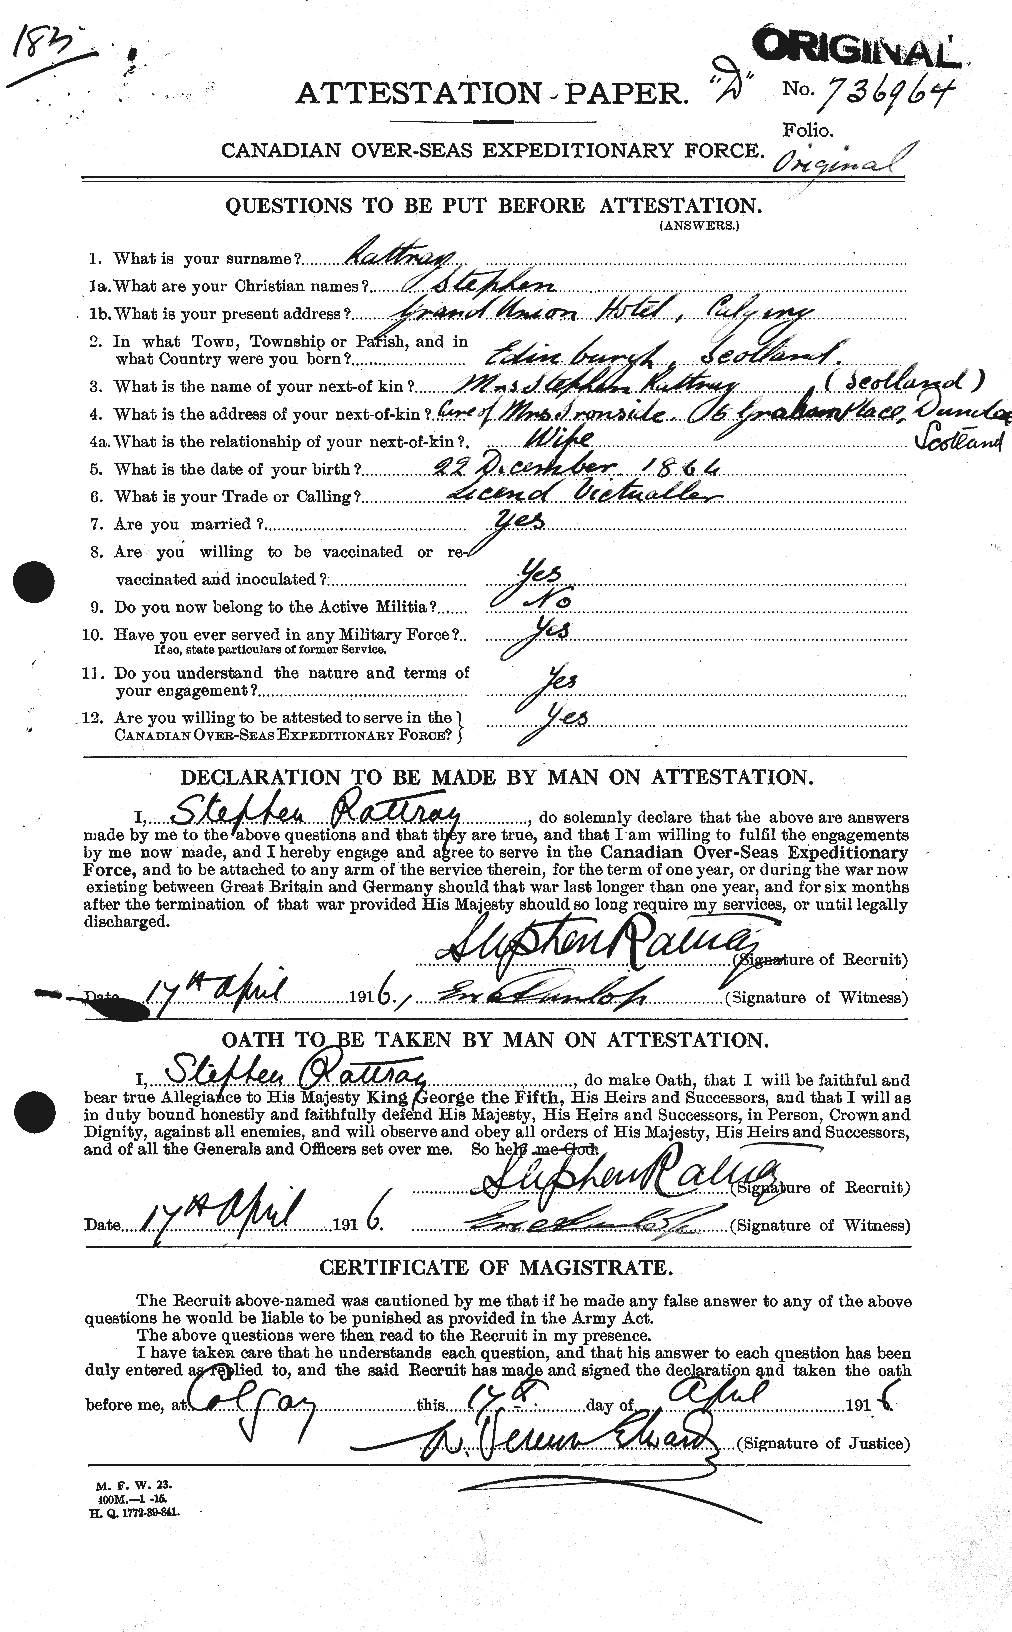 Personnel Records of the First World War - CEF 595706a